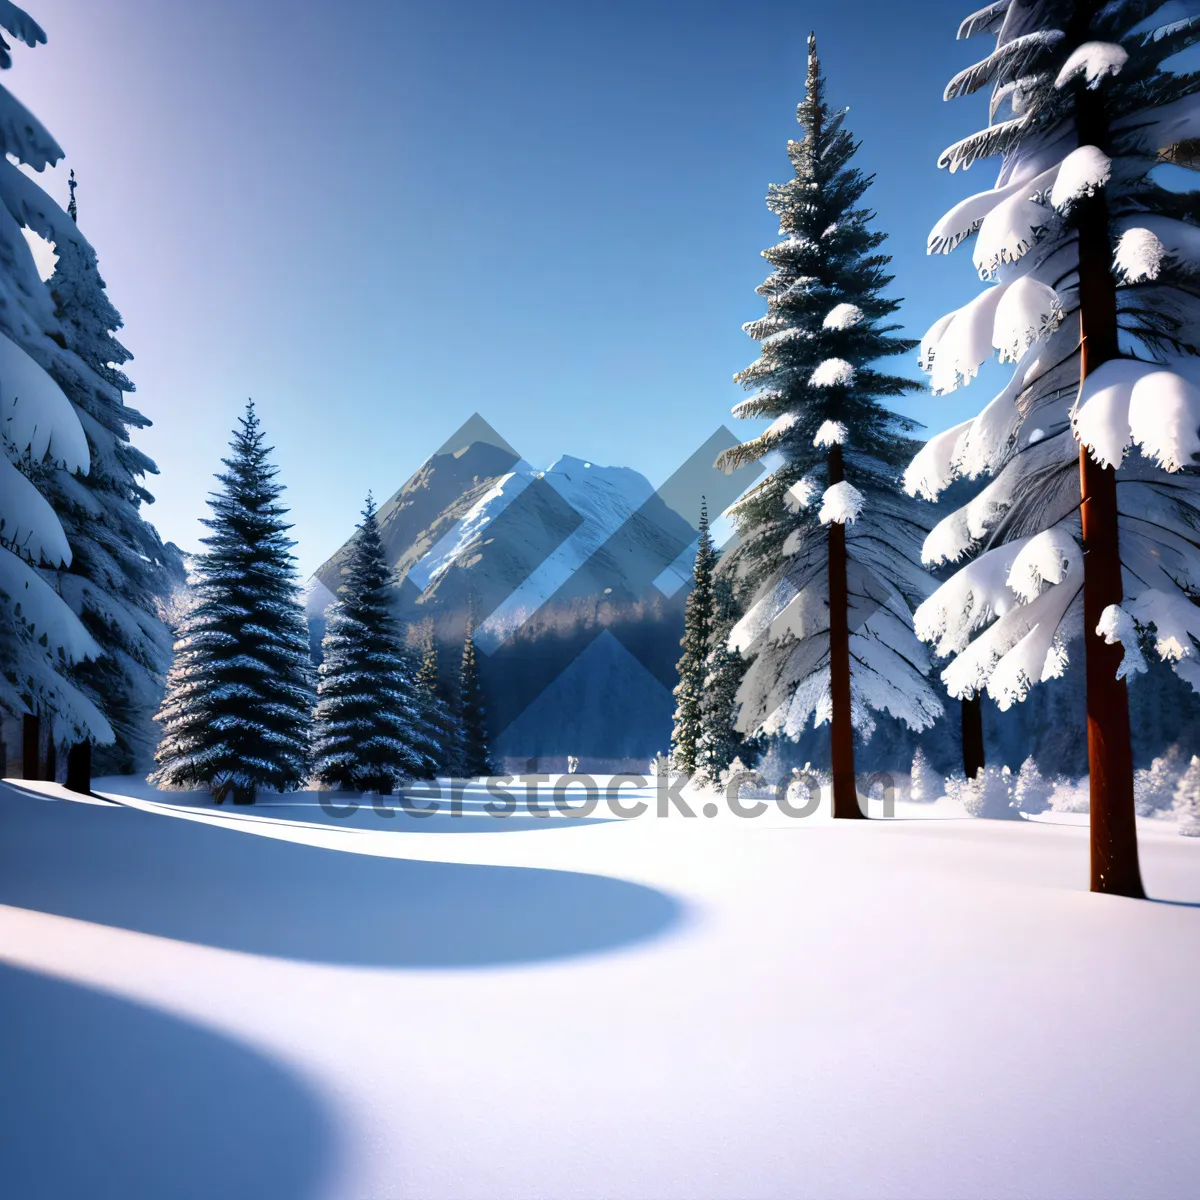 Picture of Winter Wonderland: Majestic Snow-Covered Alpine Mountain Landscape